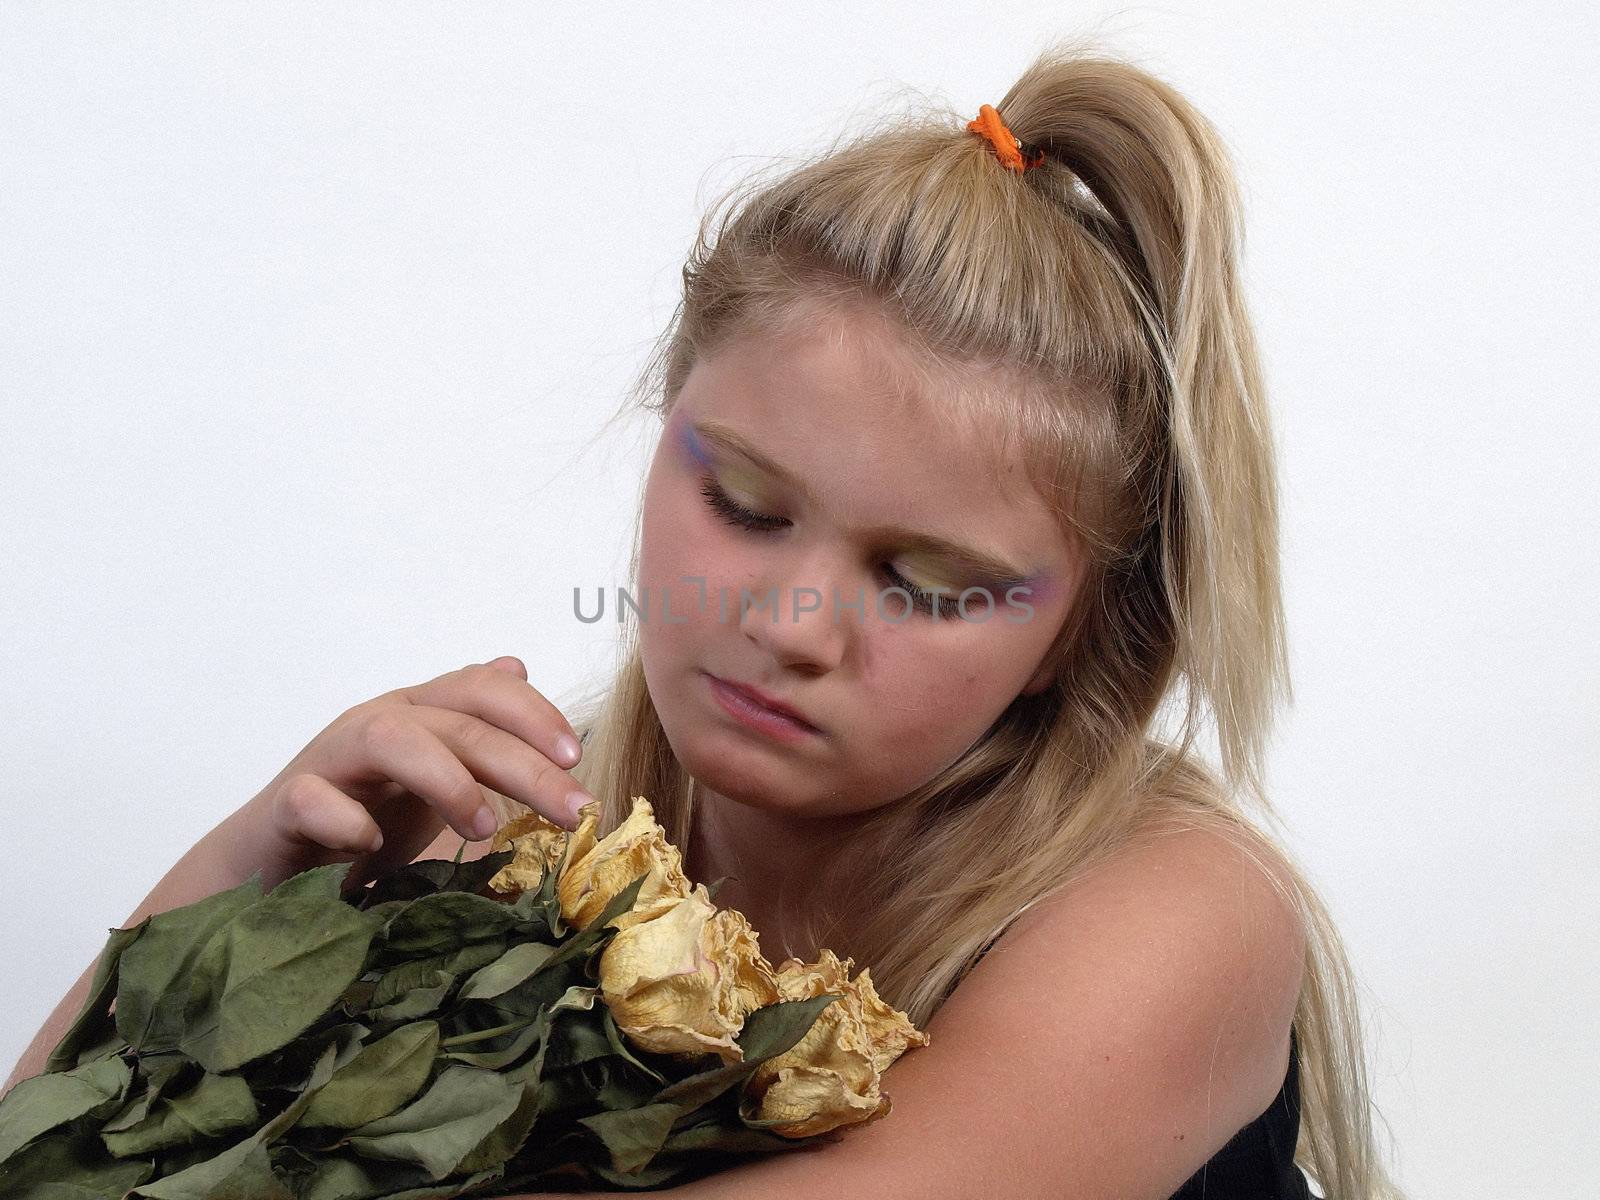 A young blonde girl thoughtfully touches a bouquet of dried roses in her arms.